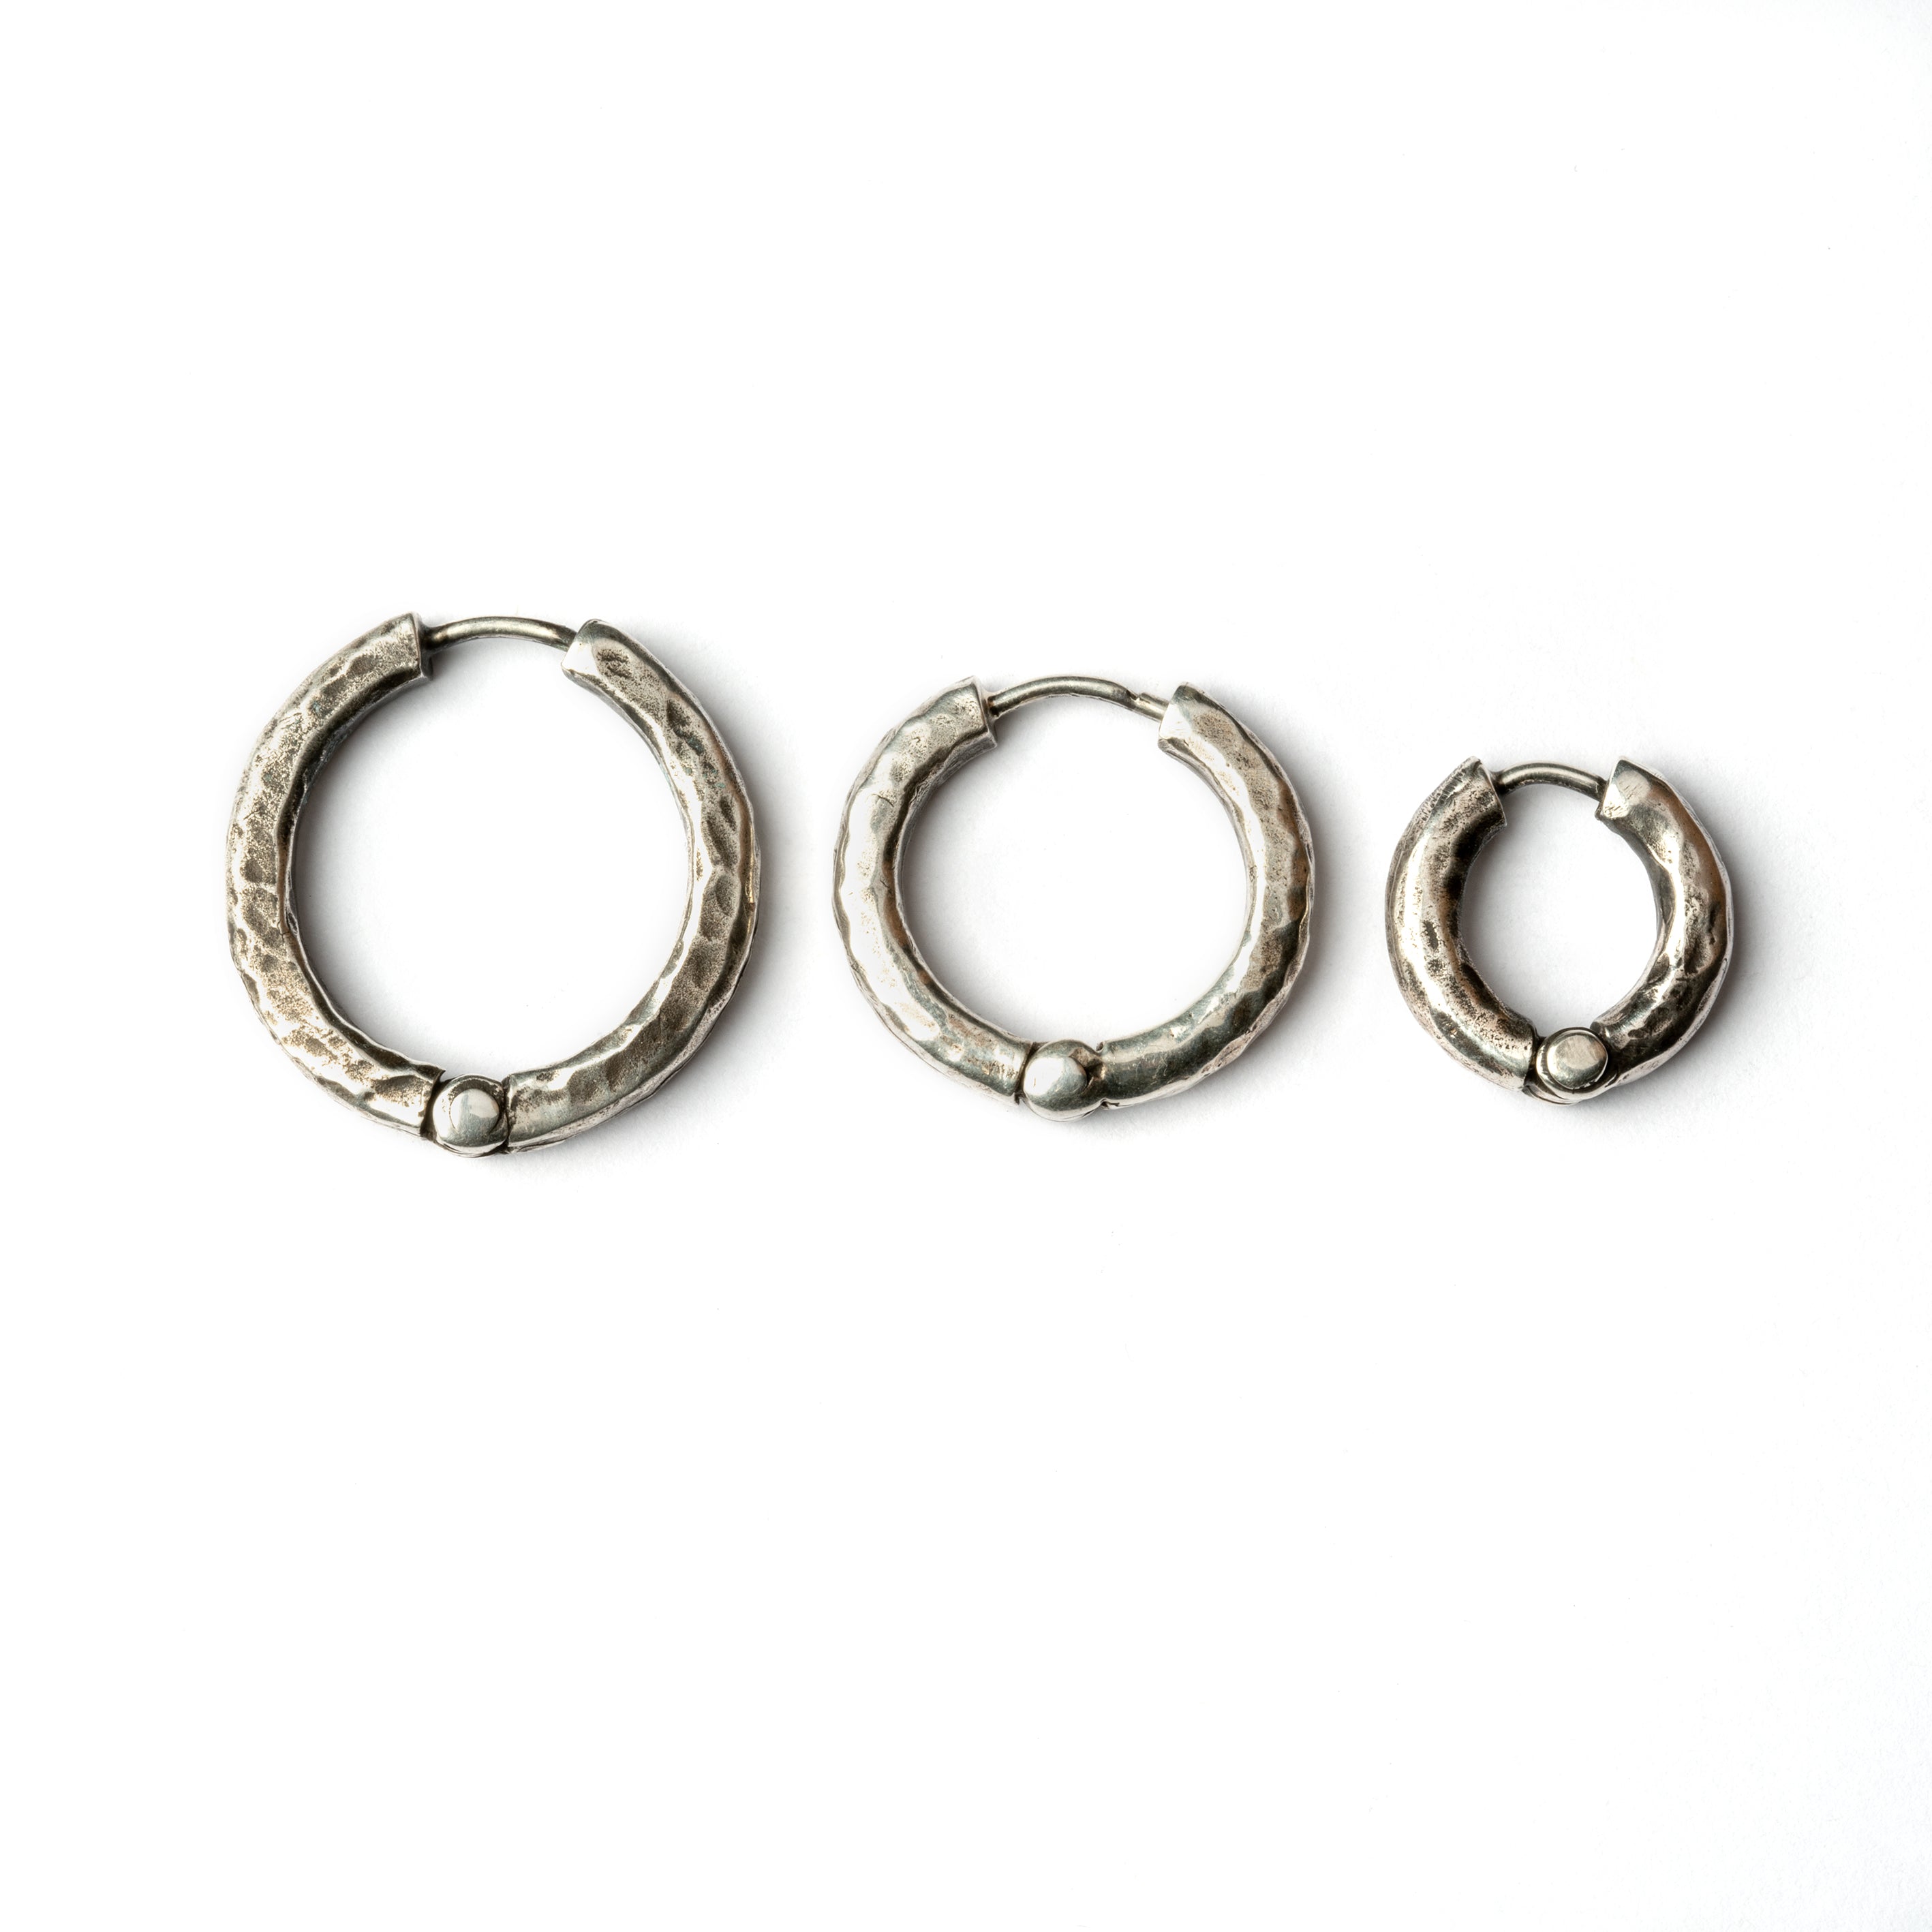 3 sizes of Hammered Silver Clicker Hoop Earrings